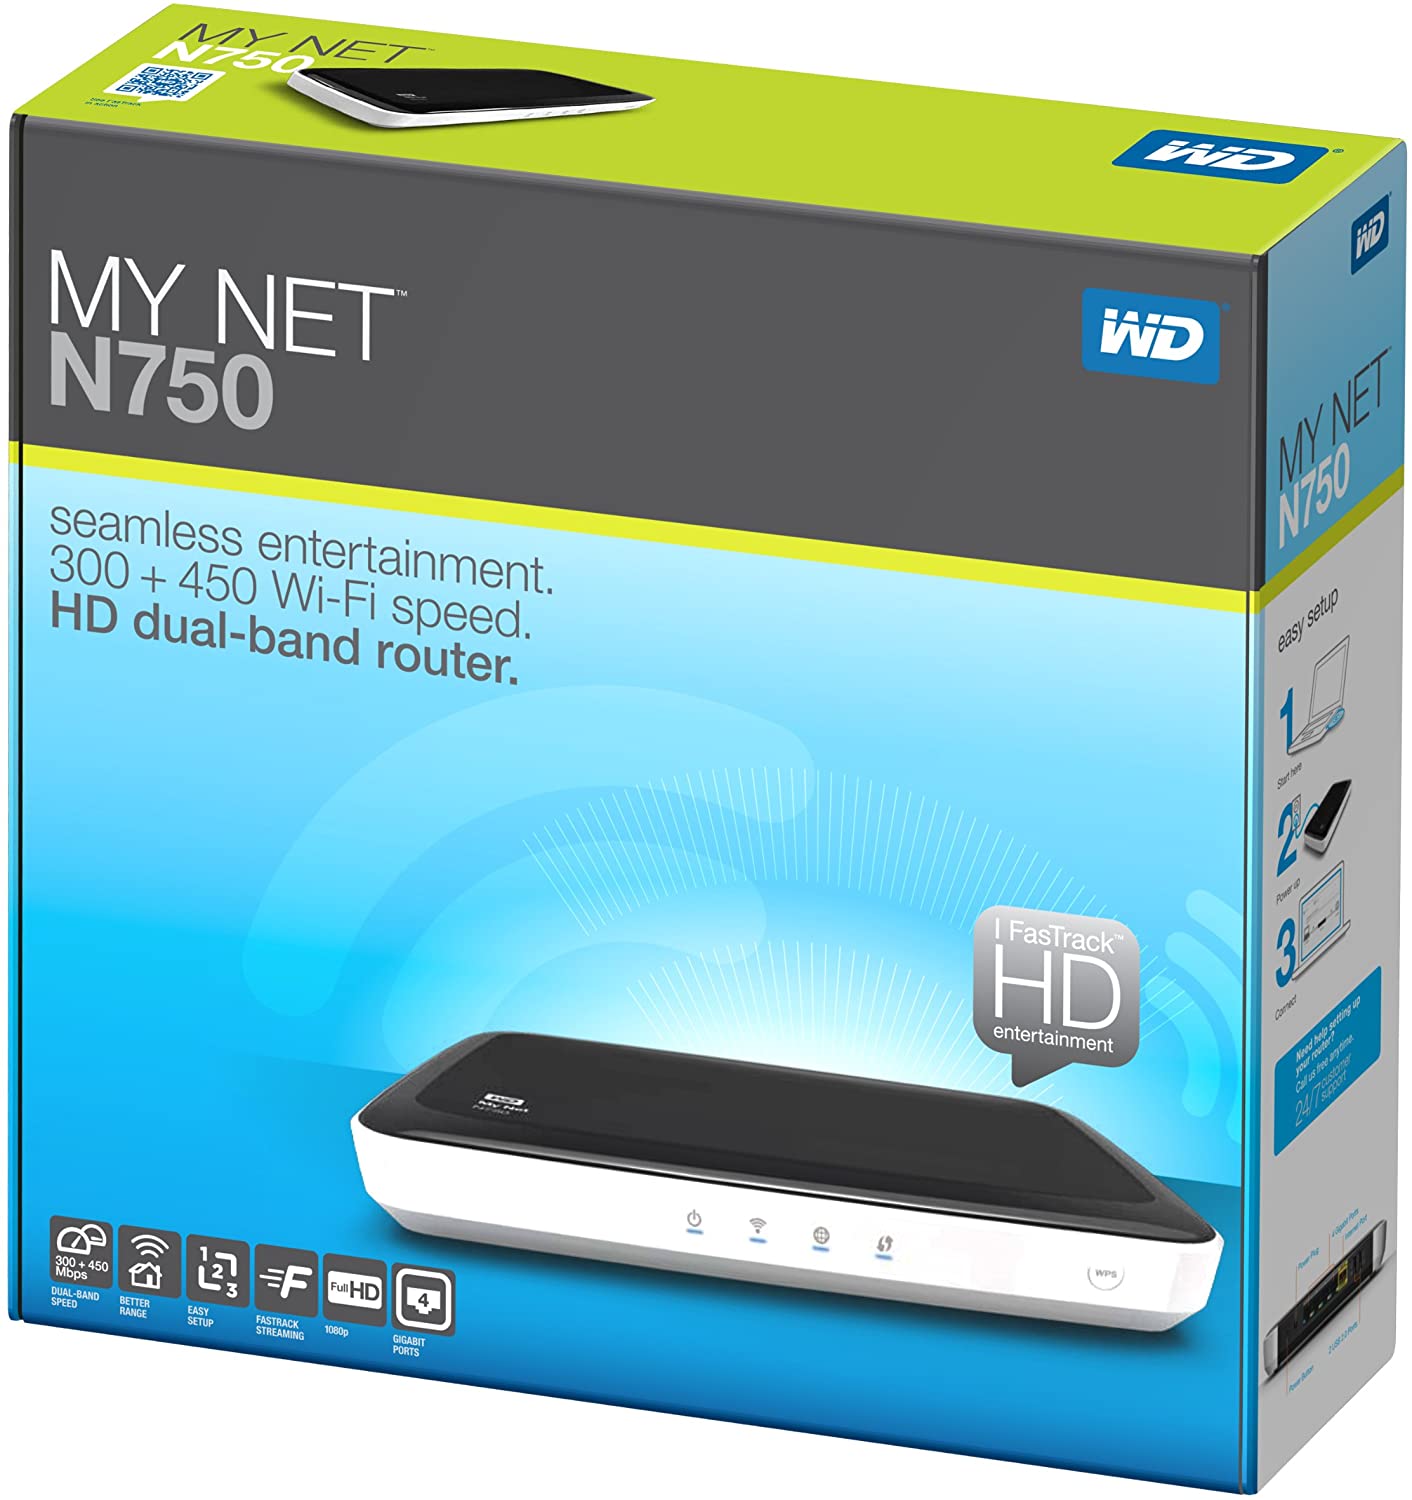 WD My Net N750 HD Dual Band Router Wireless N WiFi Router WDBAJA0000NWT